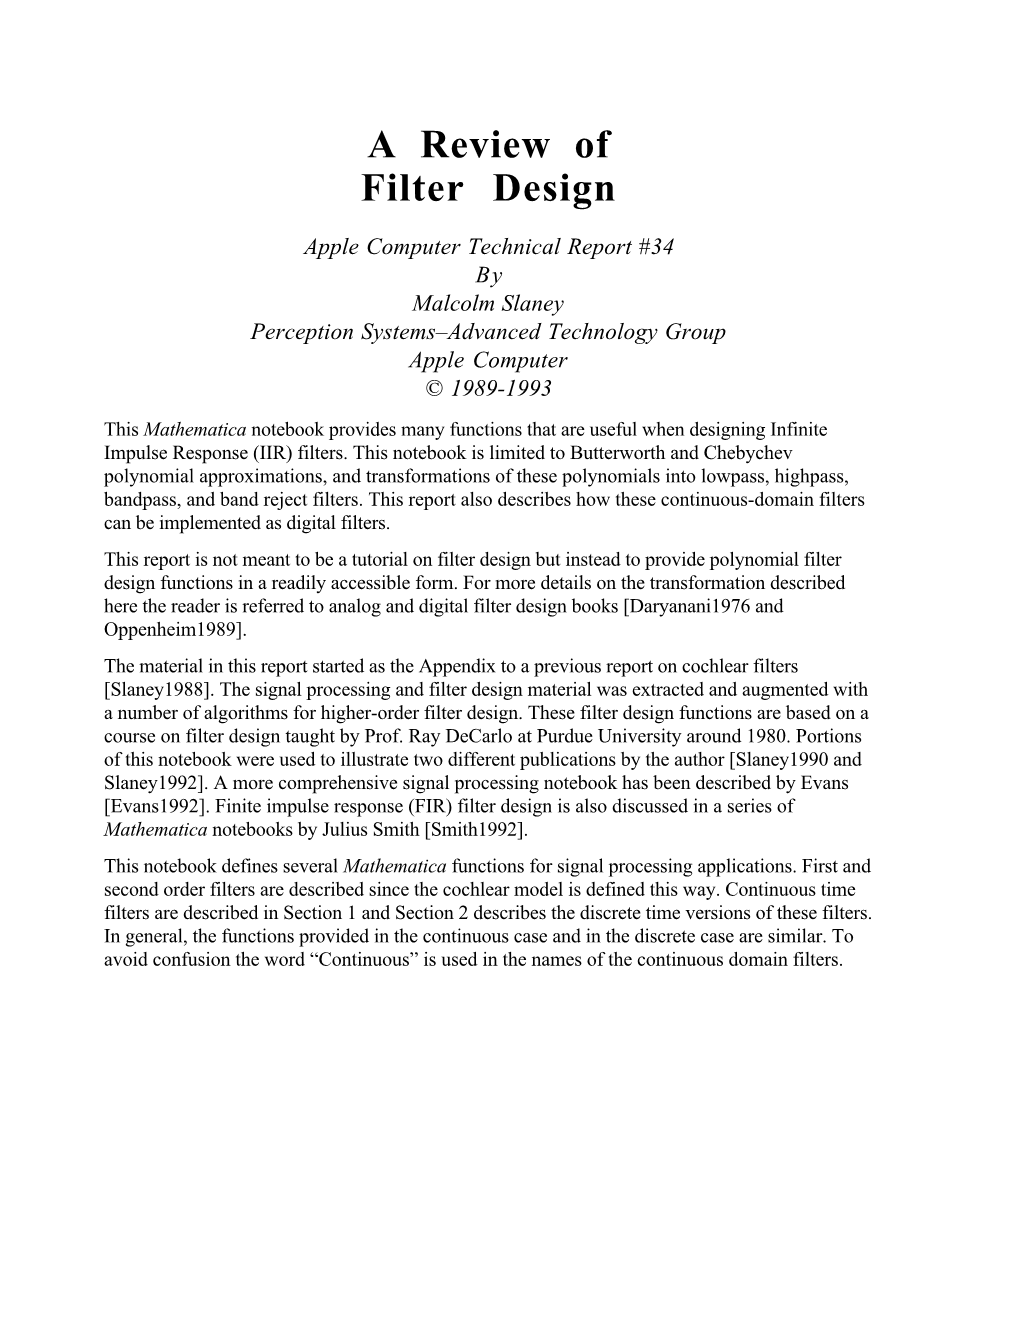 A Review of Filter Design